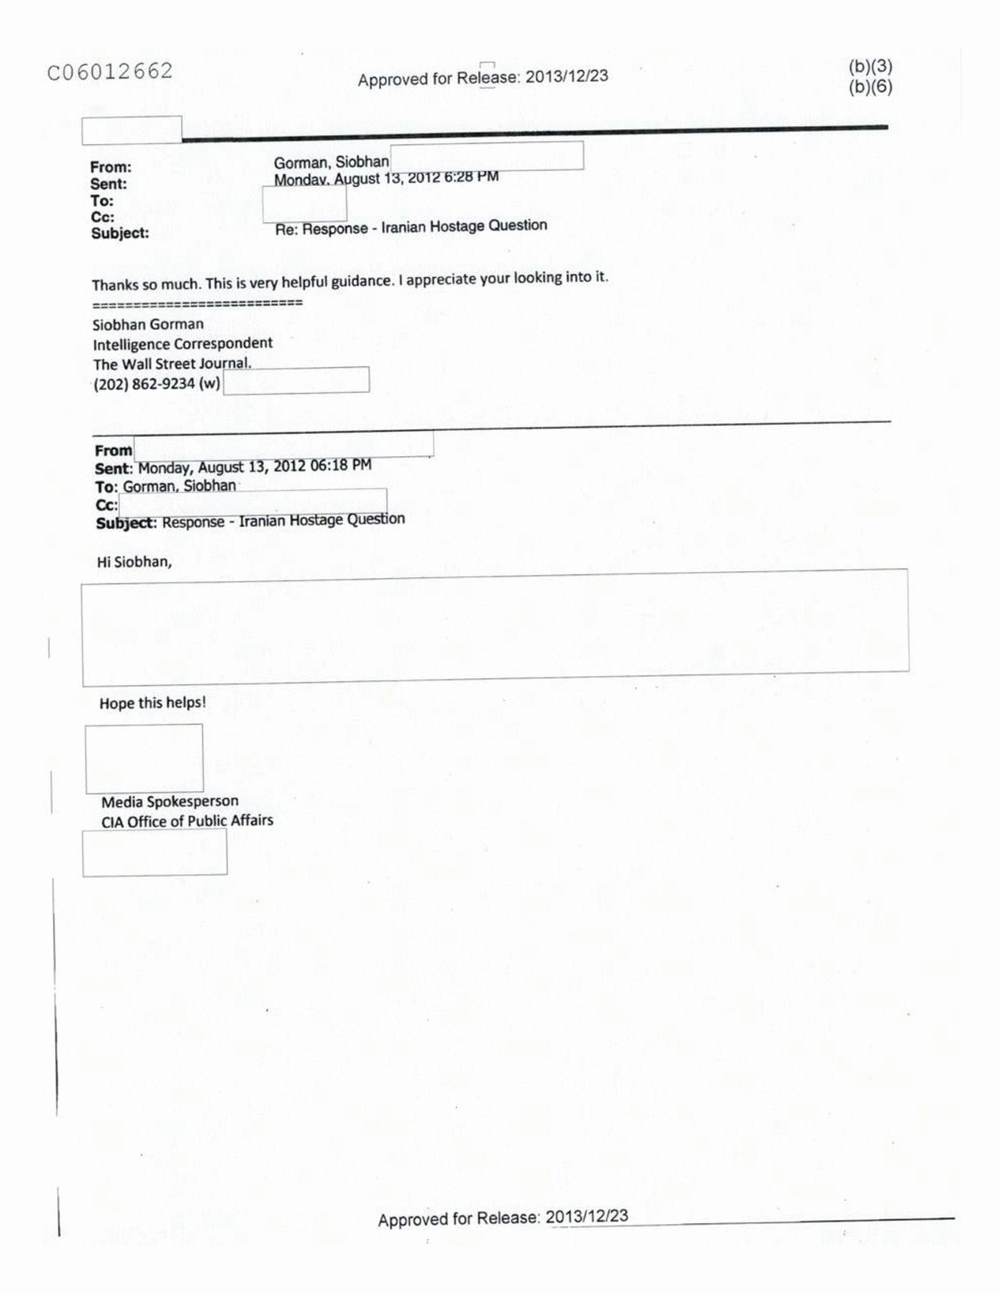 Page 240 from Email Correspondence Between Reporters and CIA Flacks